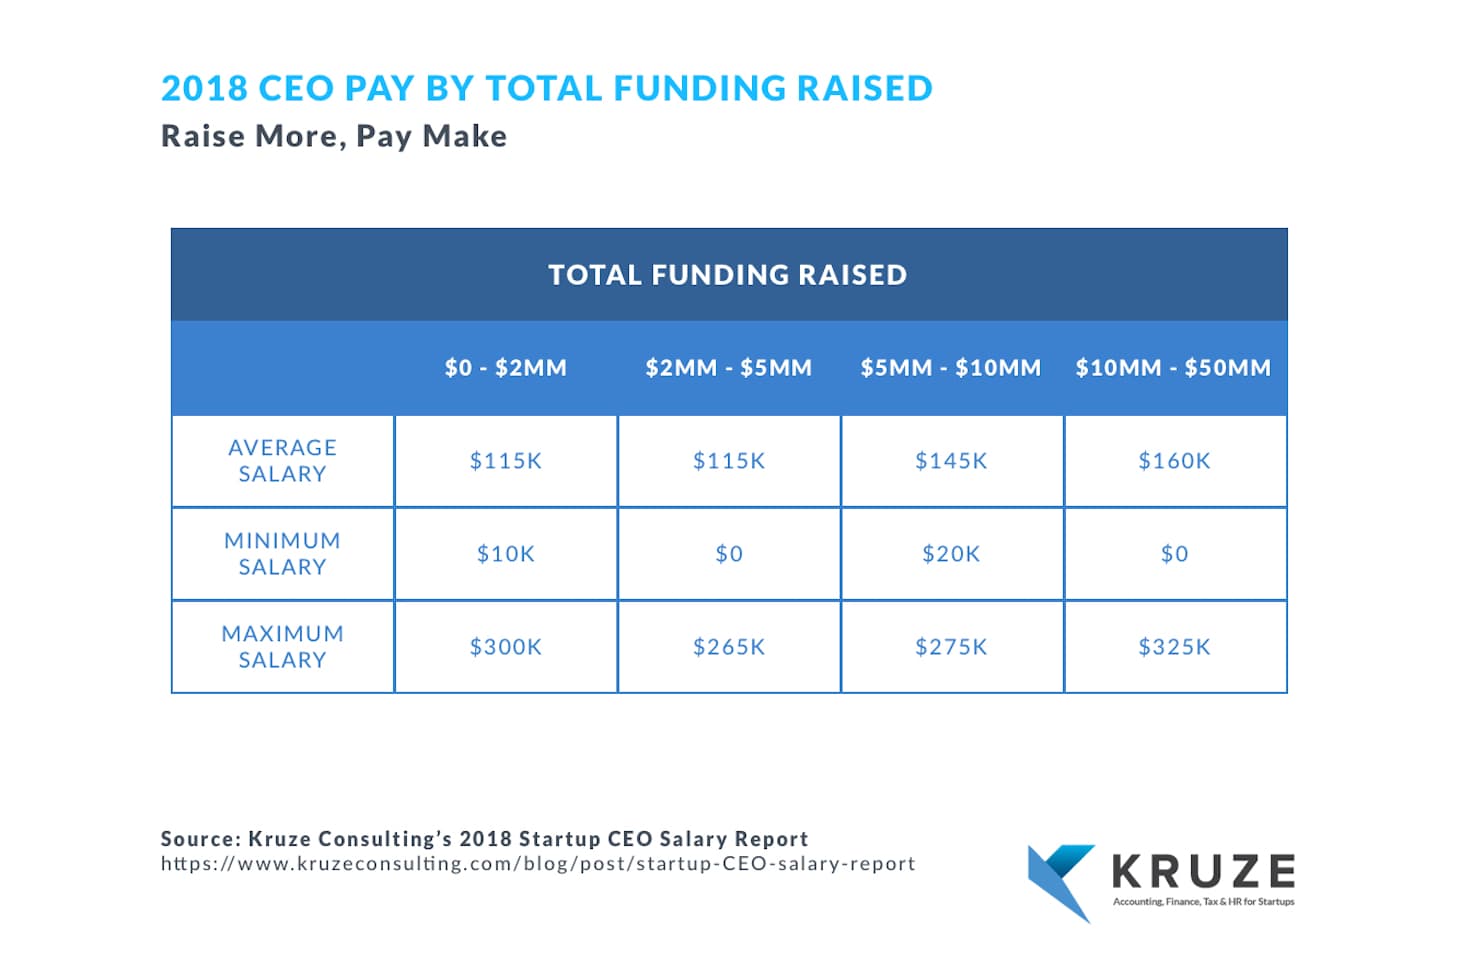 2018 CEO Pay by total funding raised